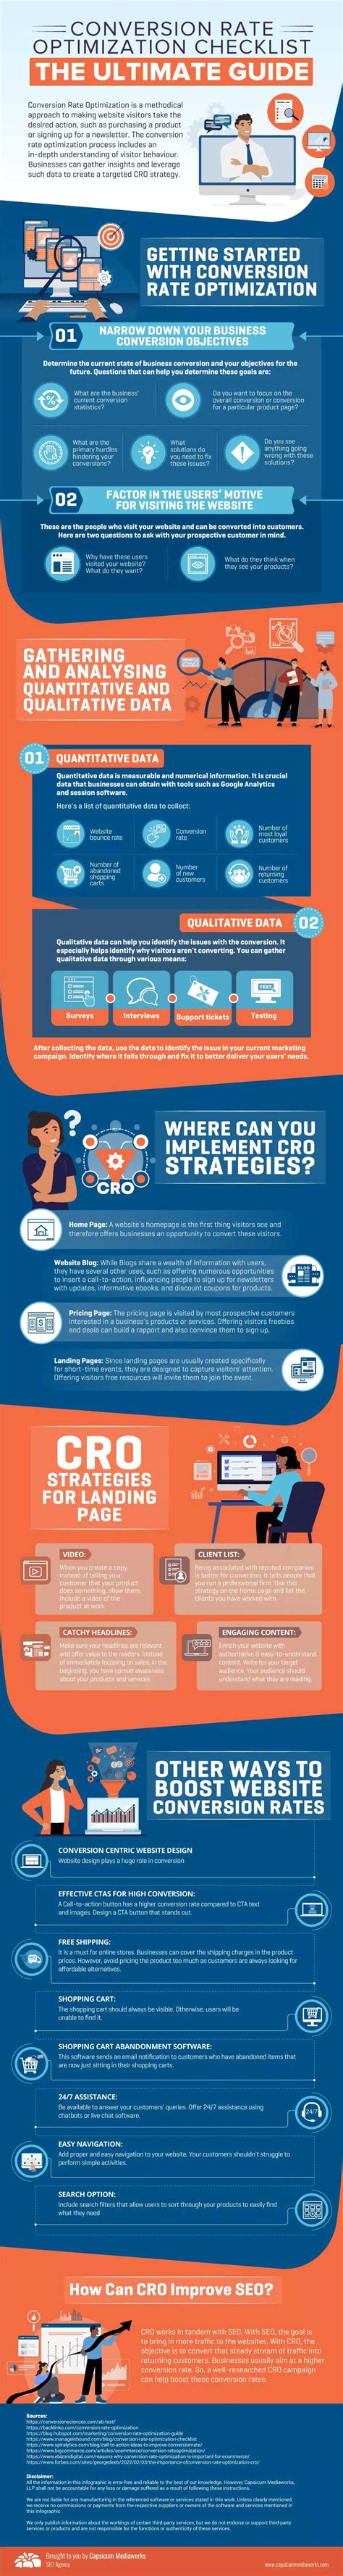 Conversion Rate Optimization Checklist The Ultimate Guide Infographic